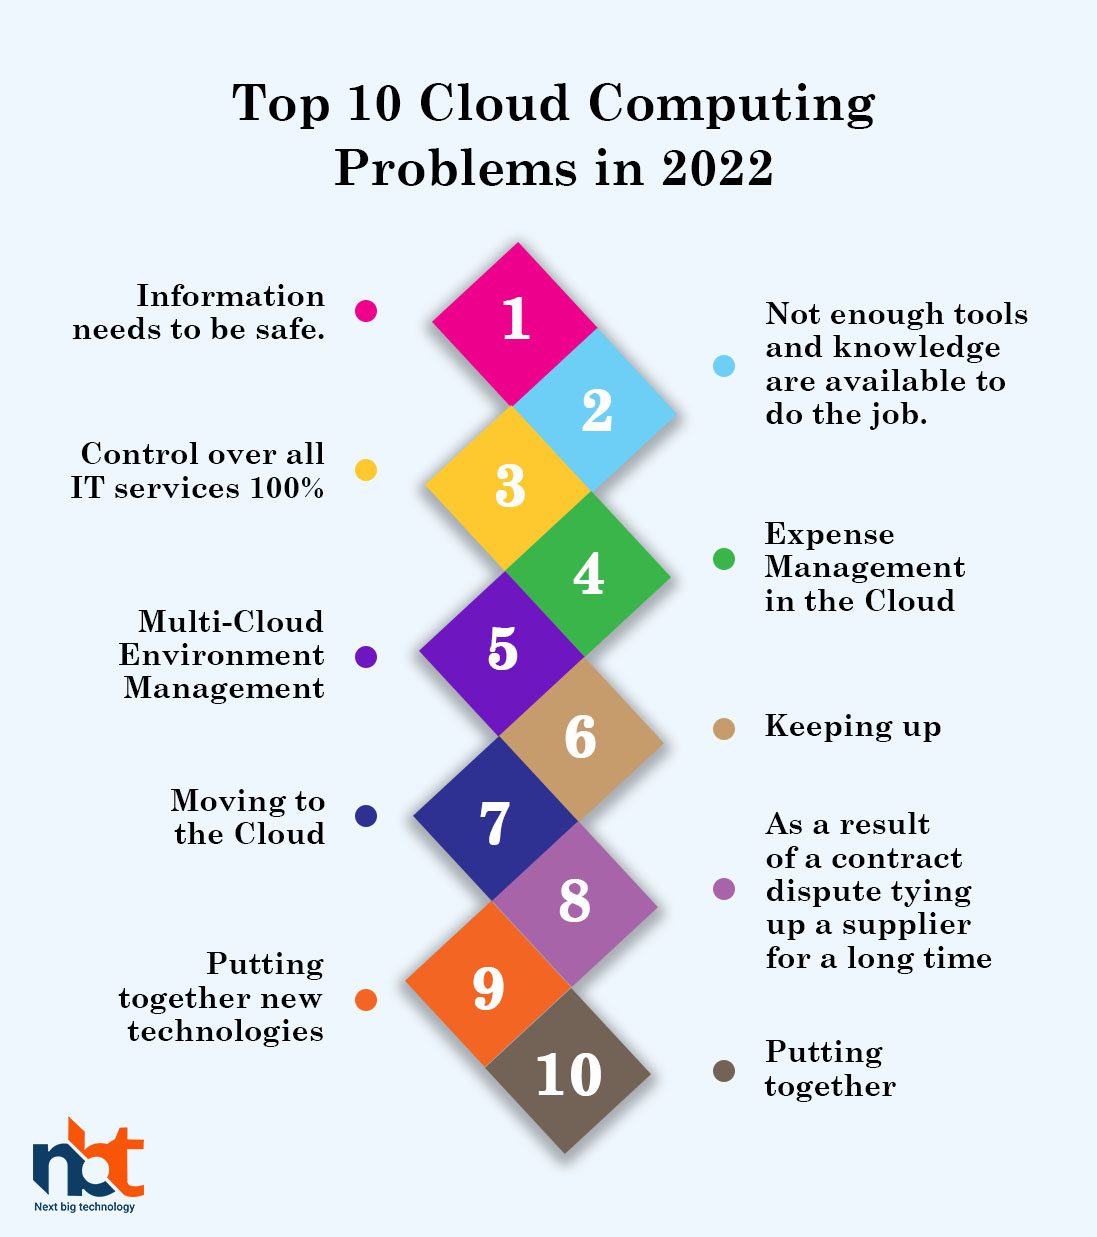 Top 10 Cloud Computing Problems in 2022